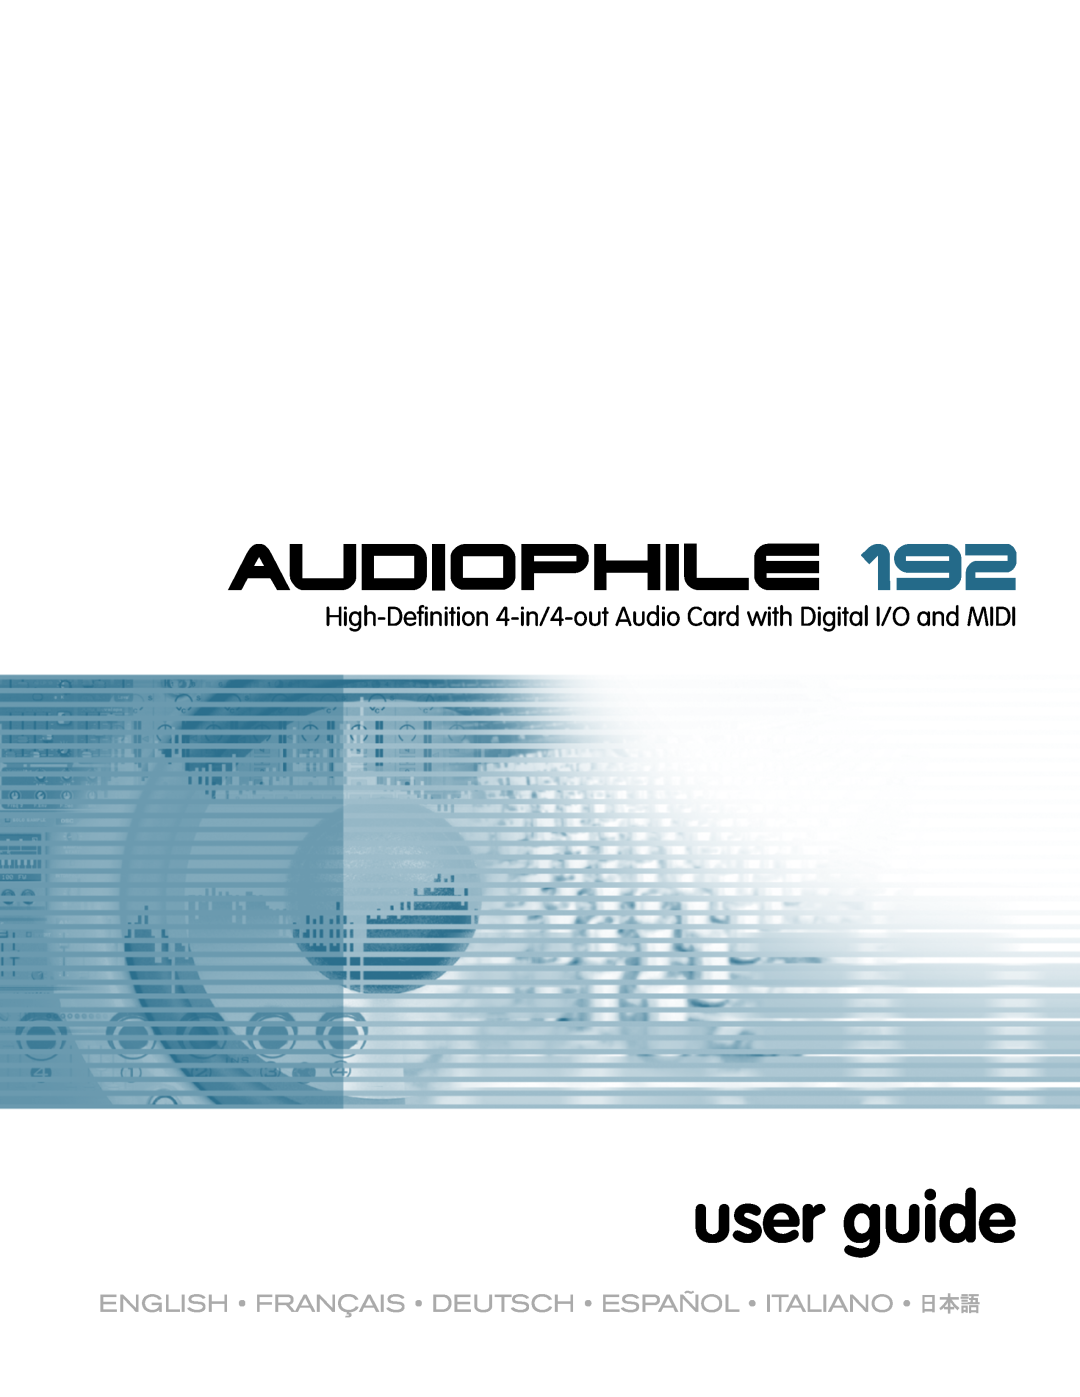 M-Audio 192 manual user guide, High-Deﬁnition 4-in/4-out Audio Card with Digital I/O and MIDI 